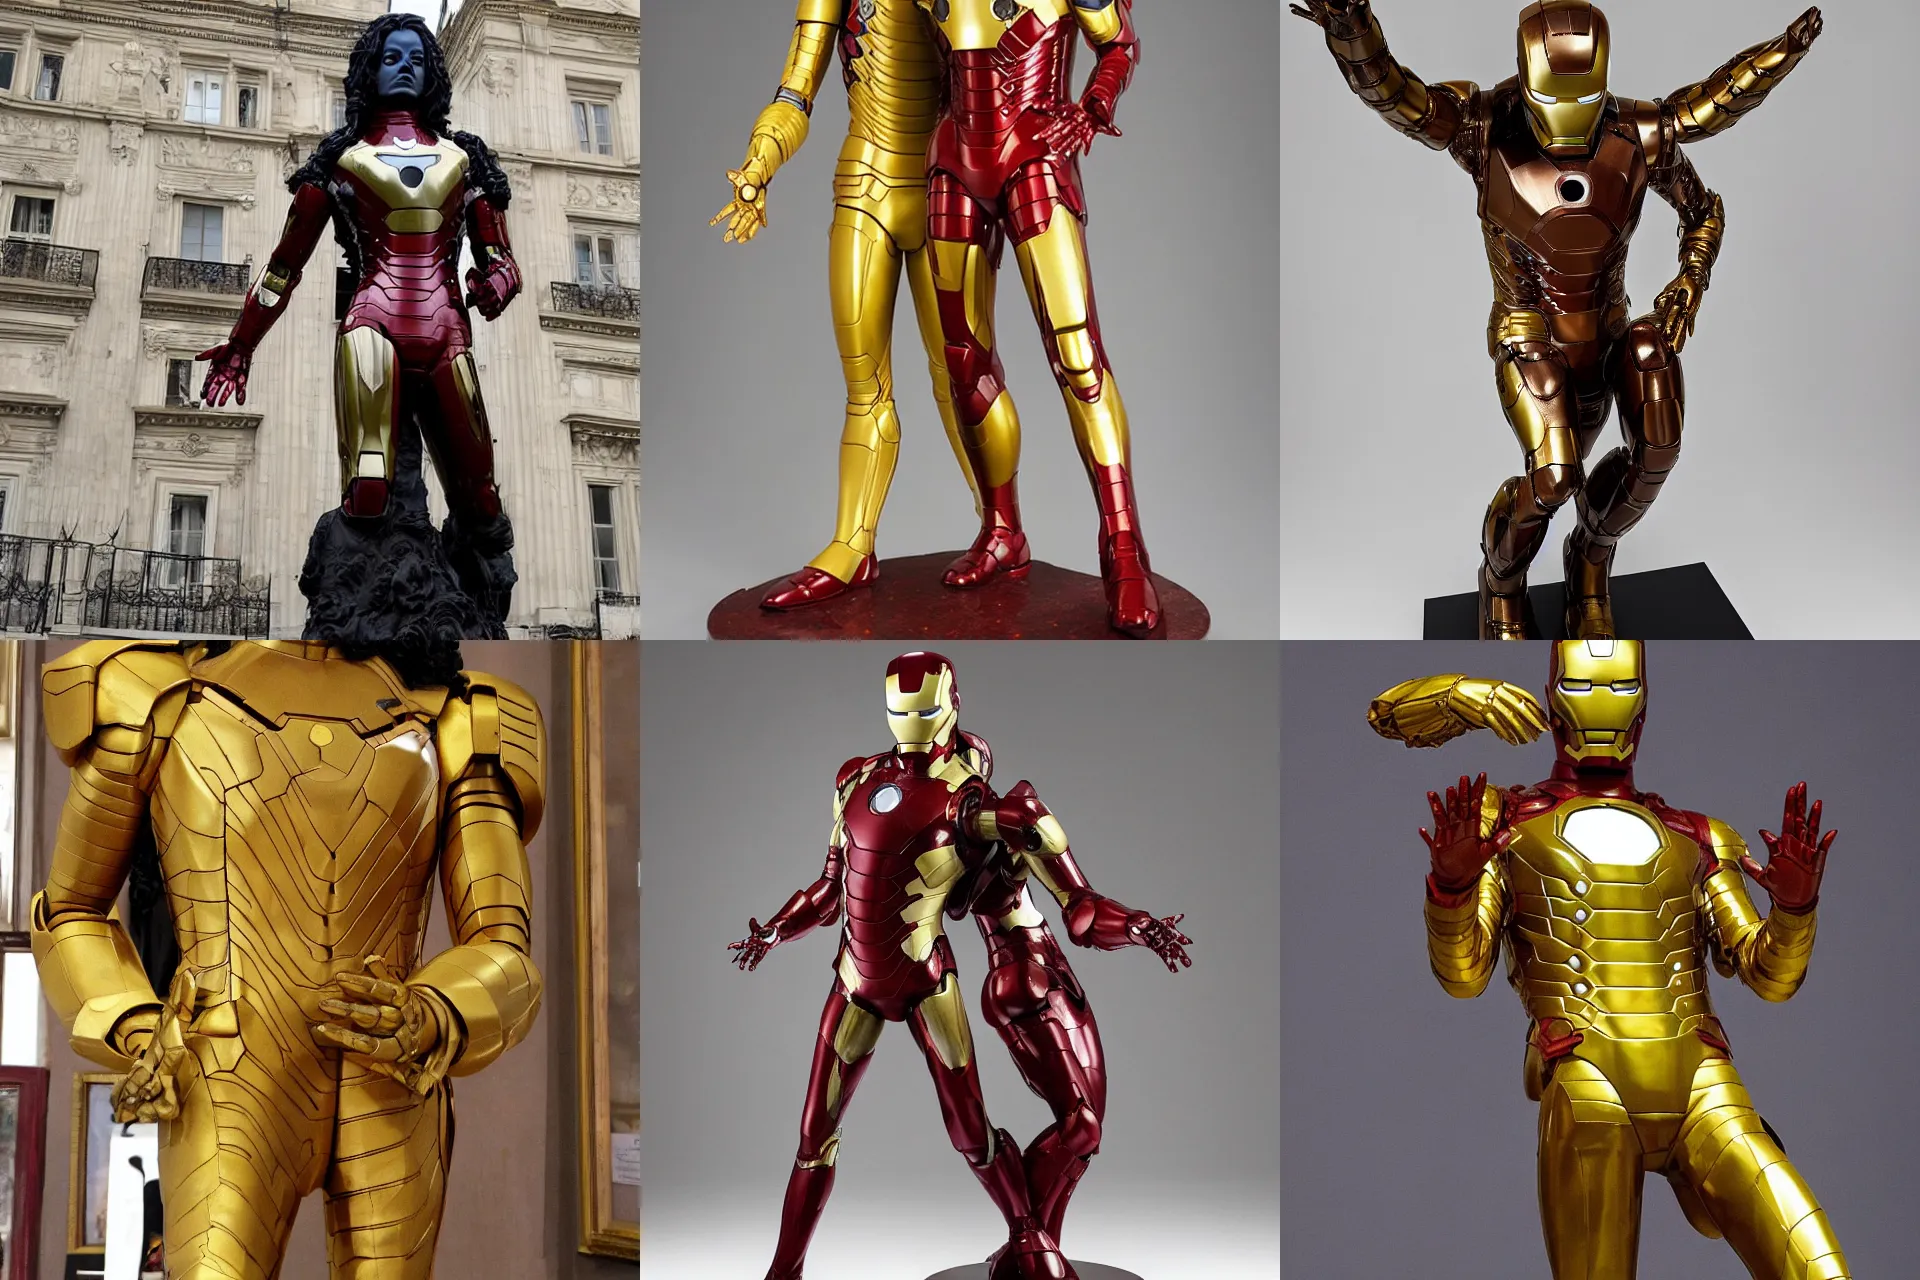 Prompt: Baroque statue of Michael Jackson wearing an Iron Man suit